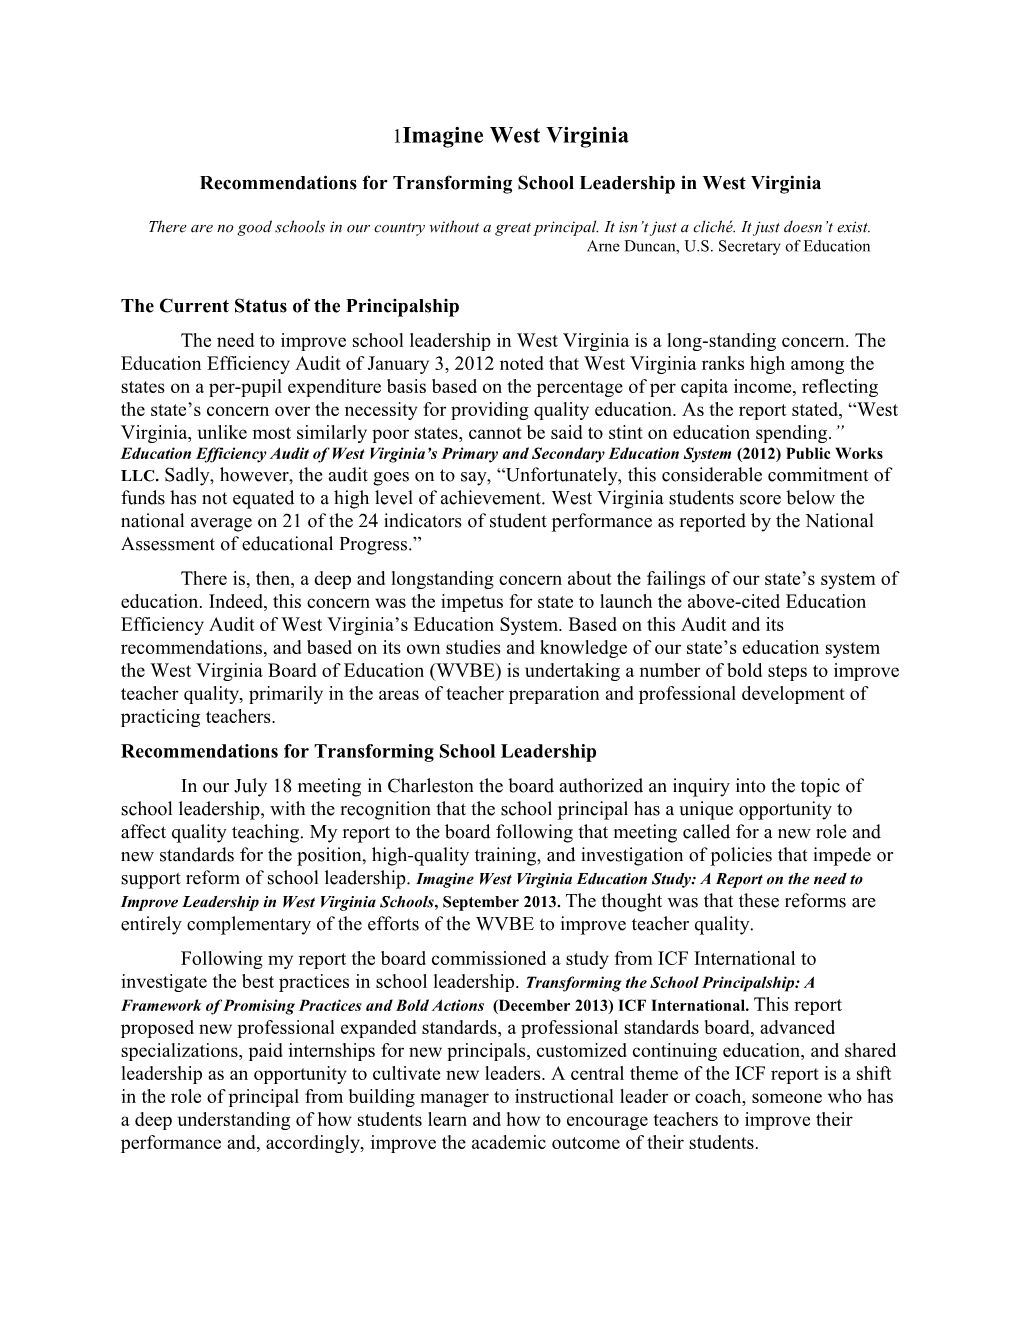 Recommendations for Transforming School Leadership in West Virginia